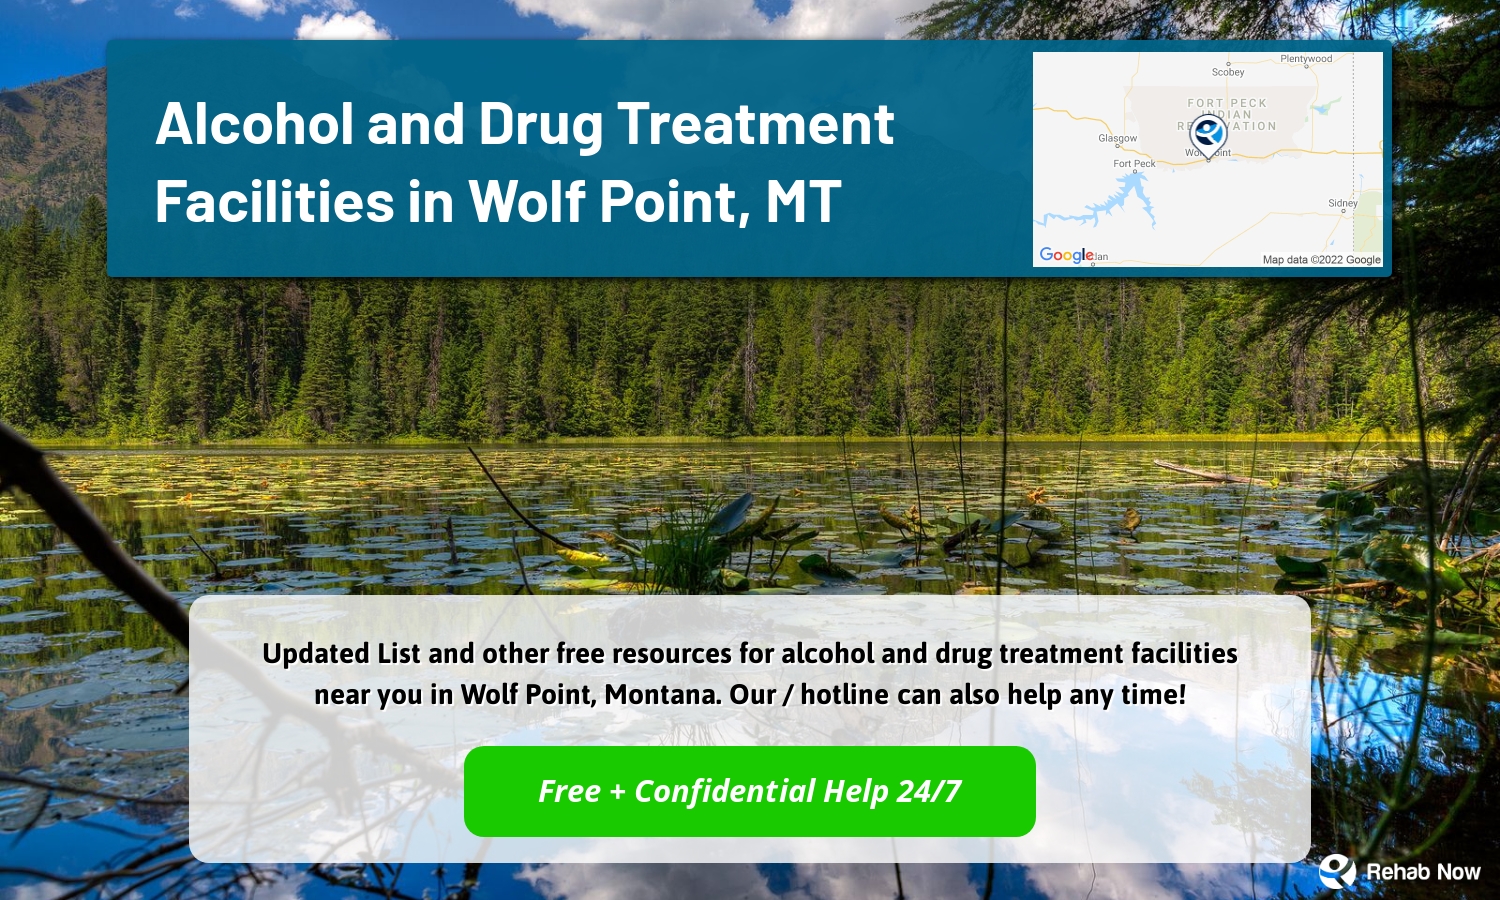  Updated List and other free resources for alcohol and drug treatment facilities near you in Wolf Point, Montana. Our / hotline can also help any time!